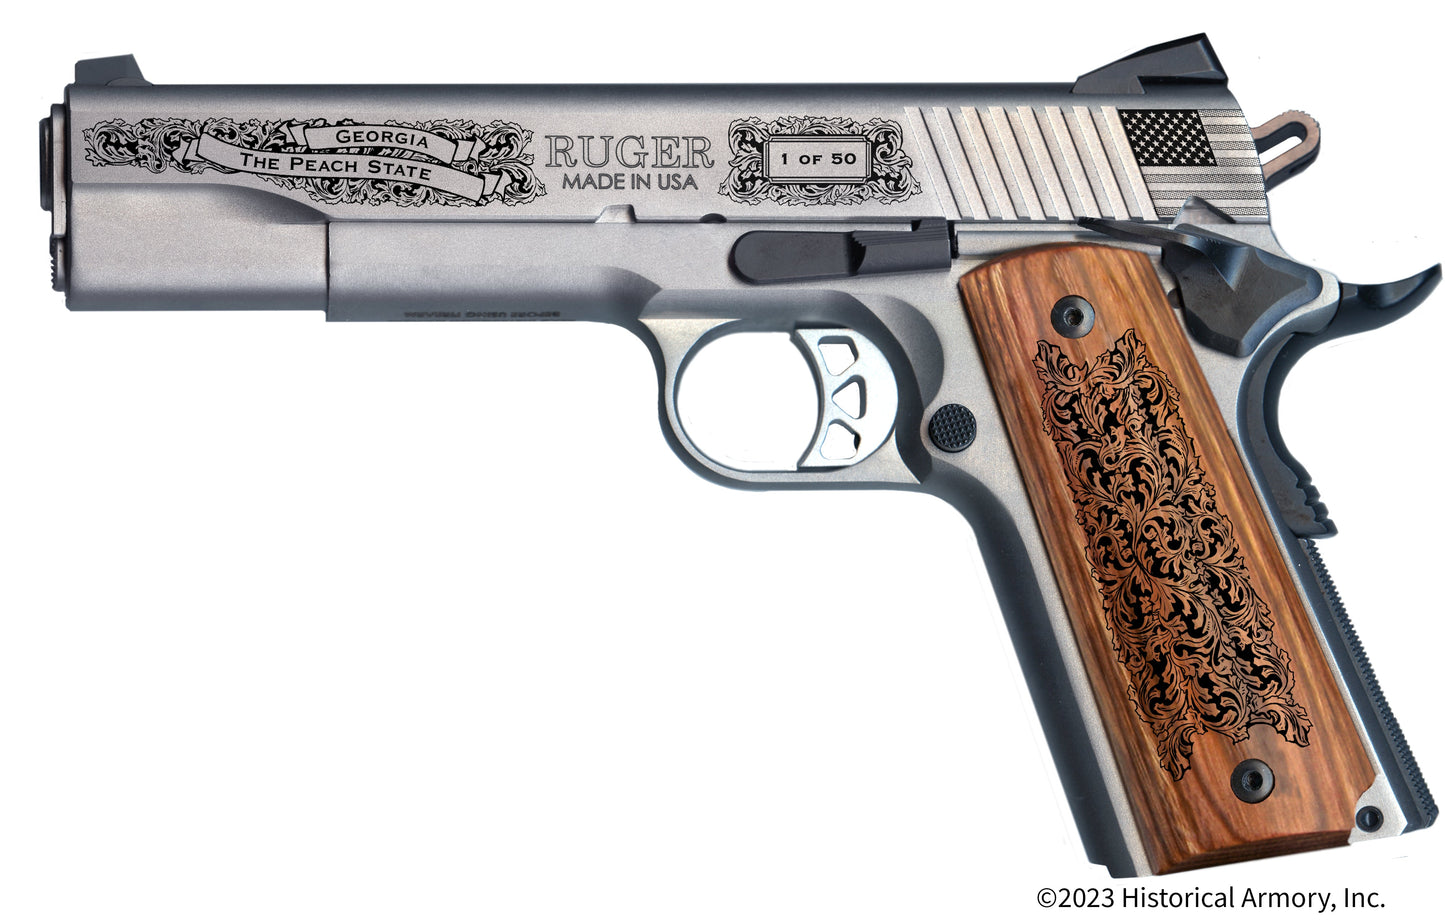 Pickens County Georgia Engraved .45 Auto Ruger 1911